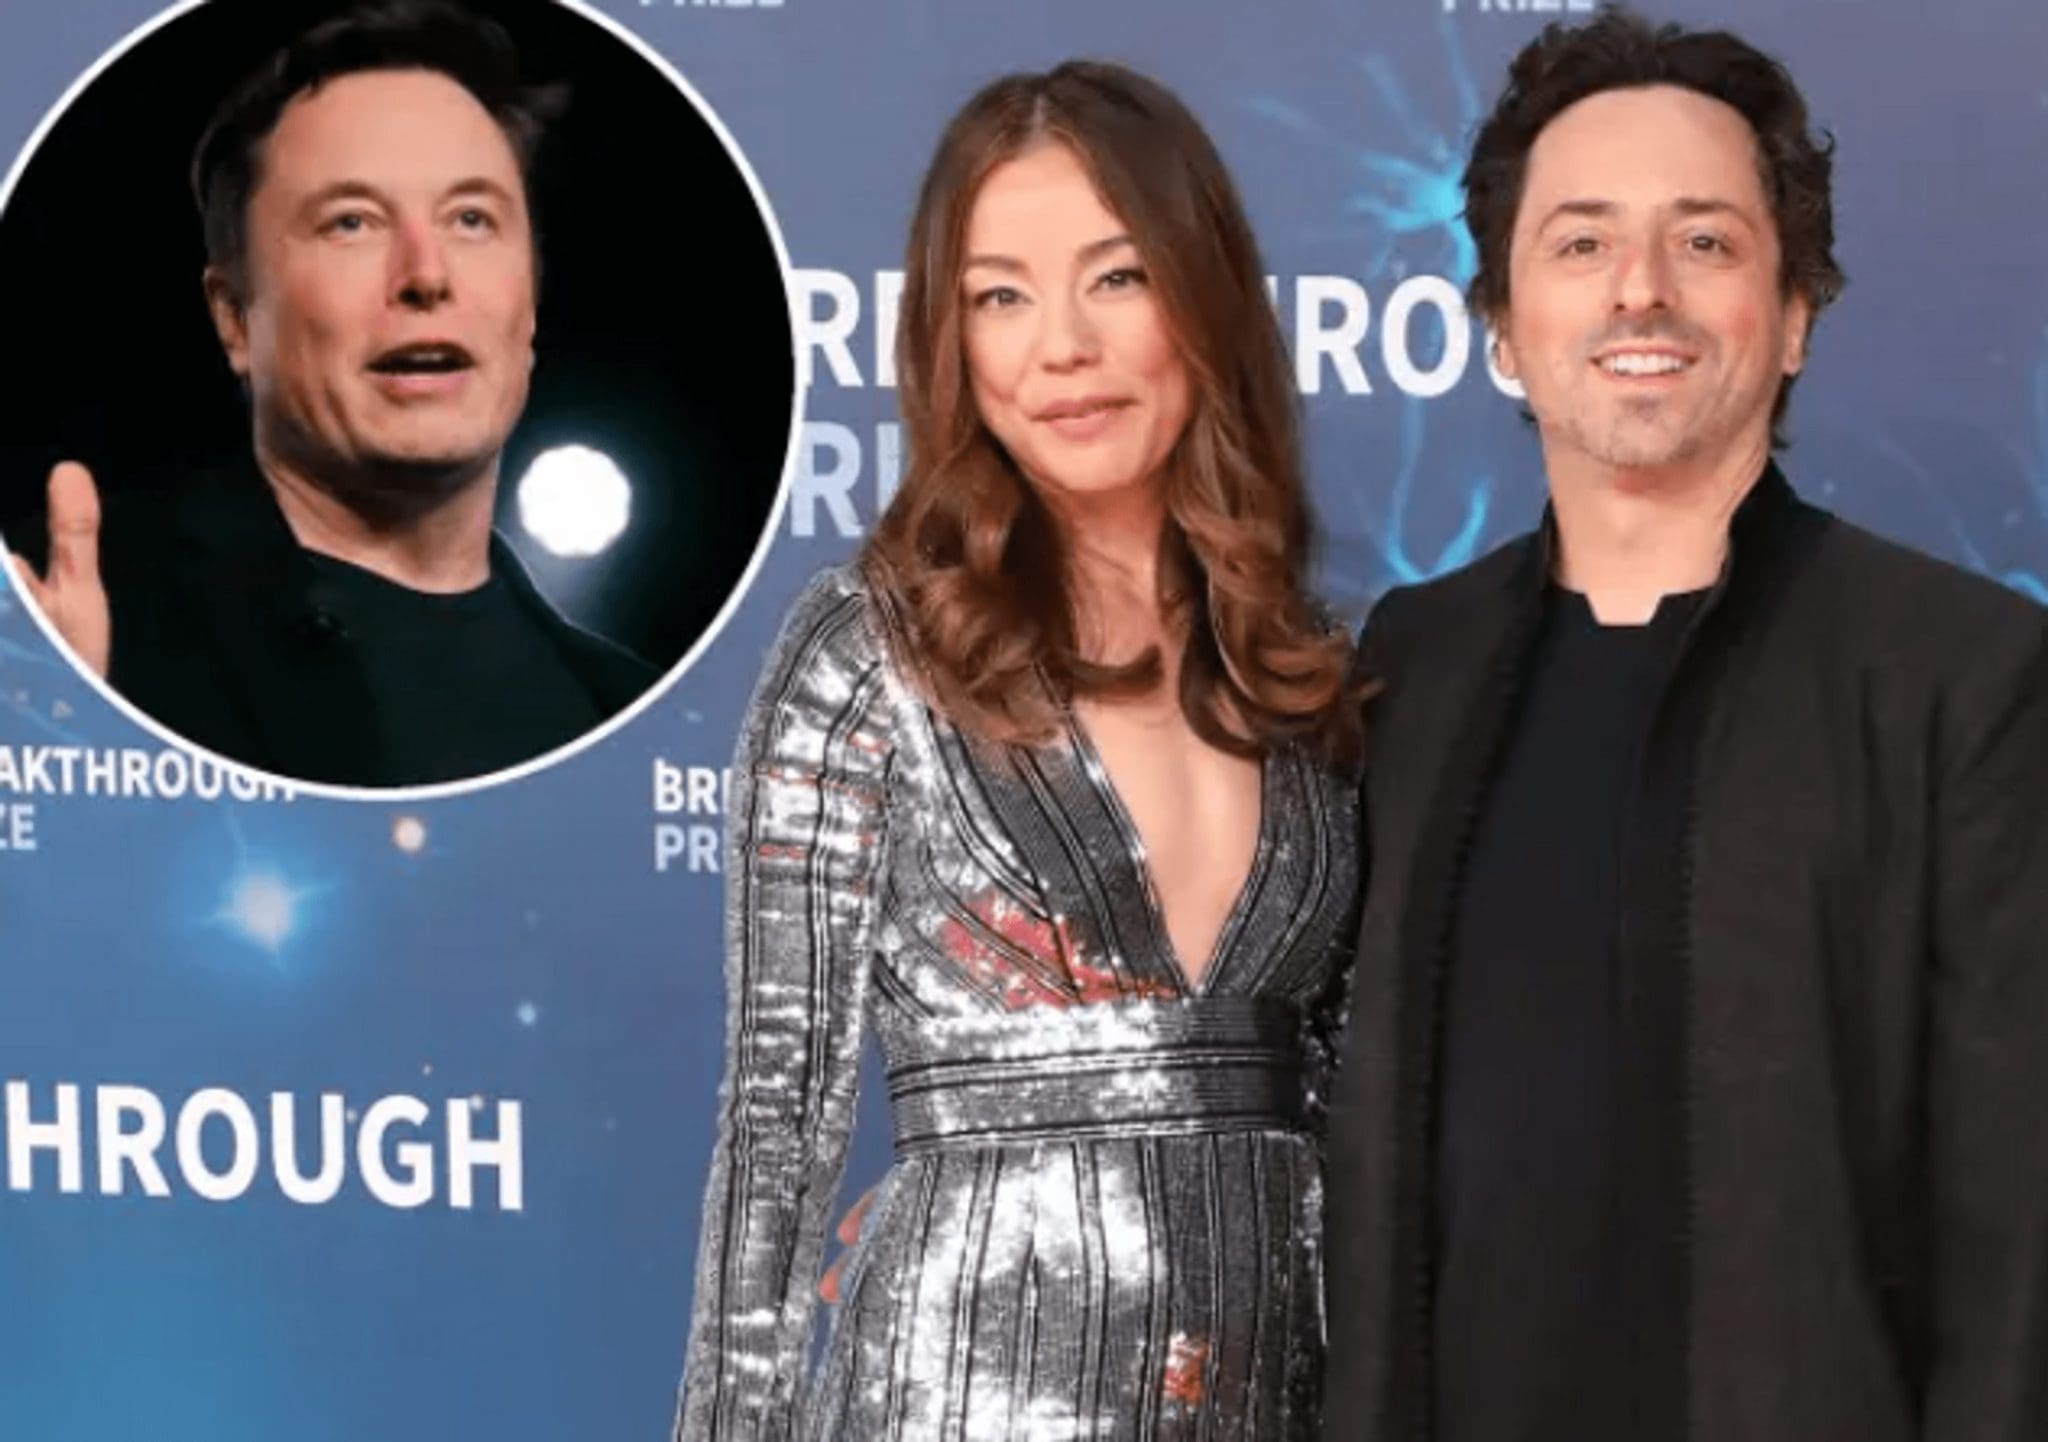 Elon Musk's Affair With Sergey Brin's Wife, Nicole Shanahan According To Her Attorney, Is An Utter Falsehood